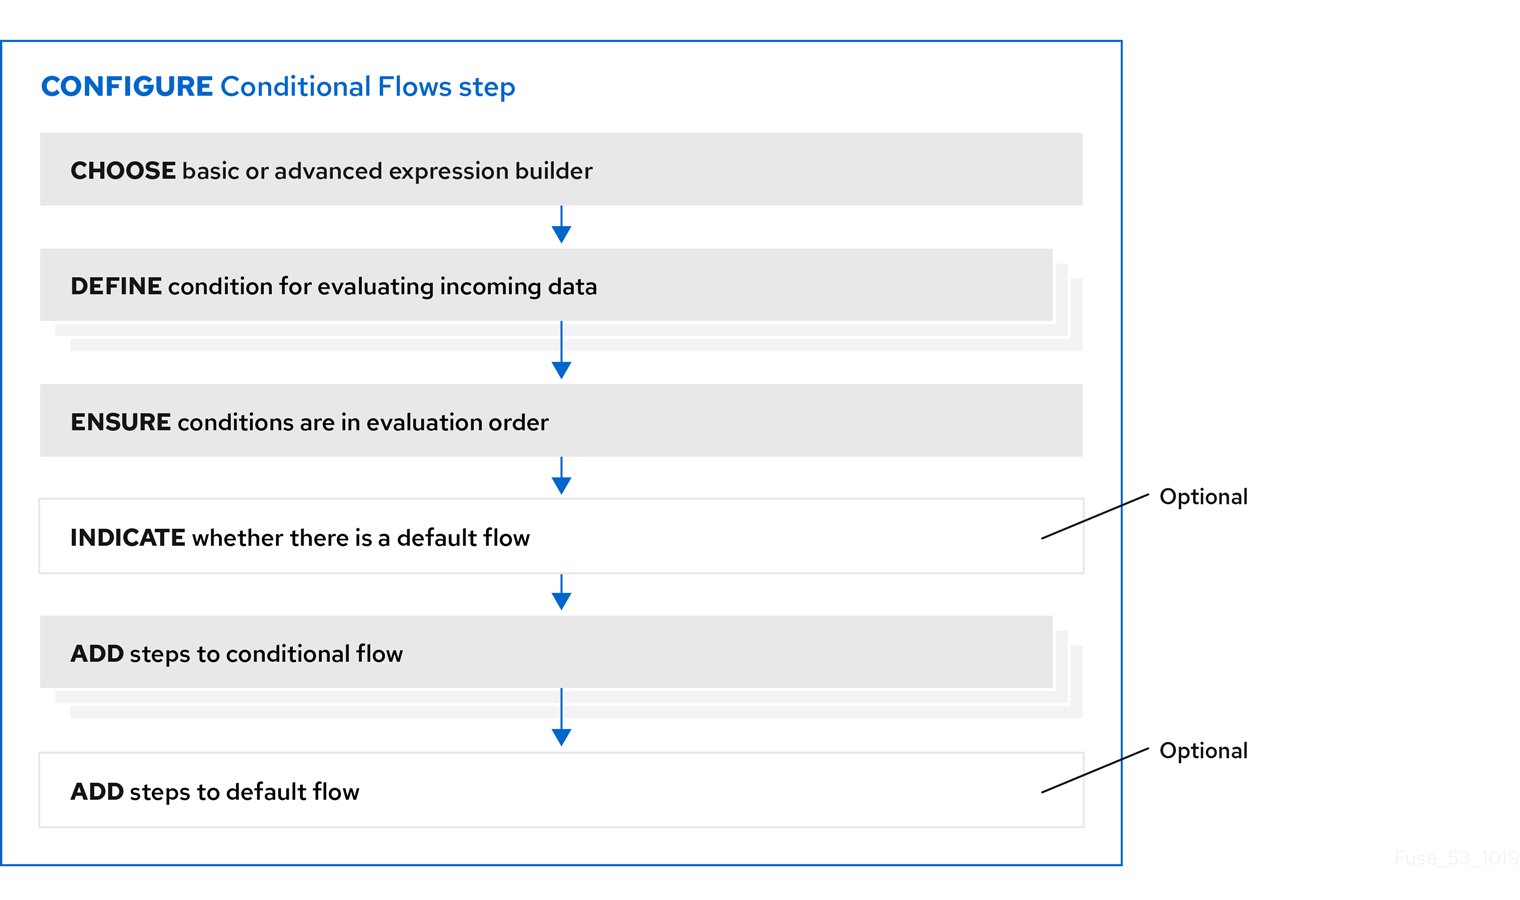 Workflow for configuring Conditional Flows step